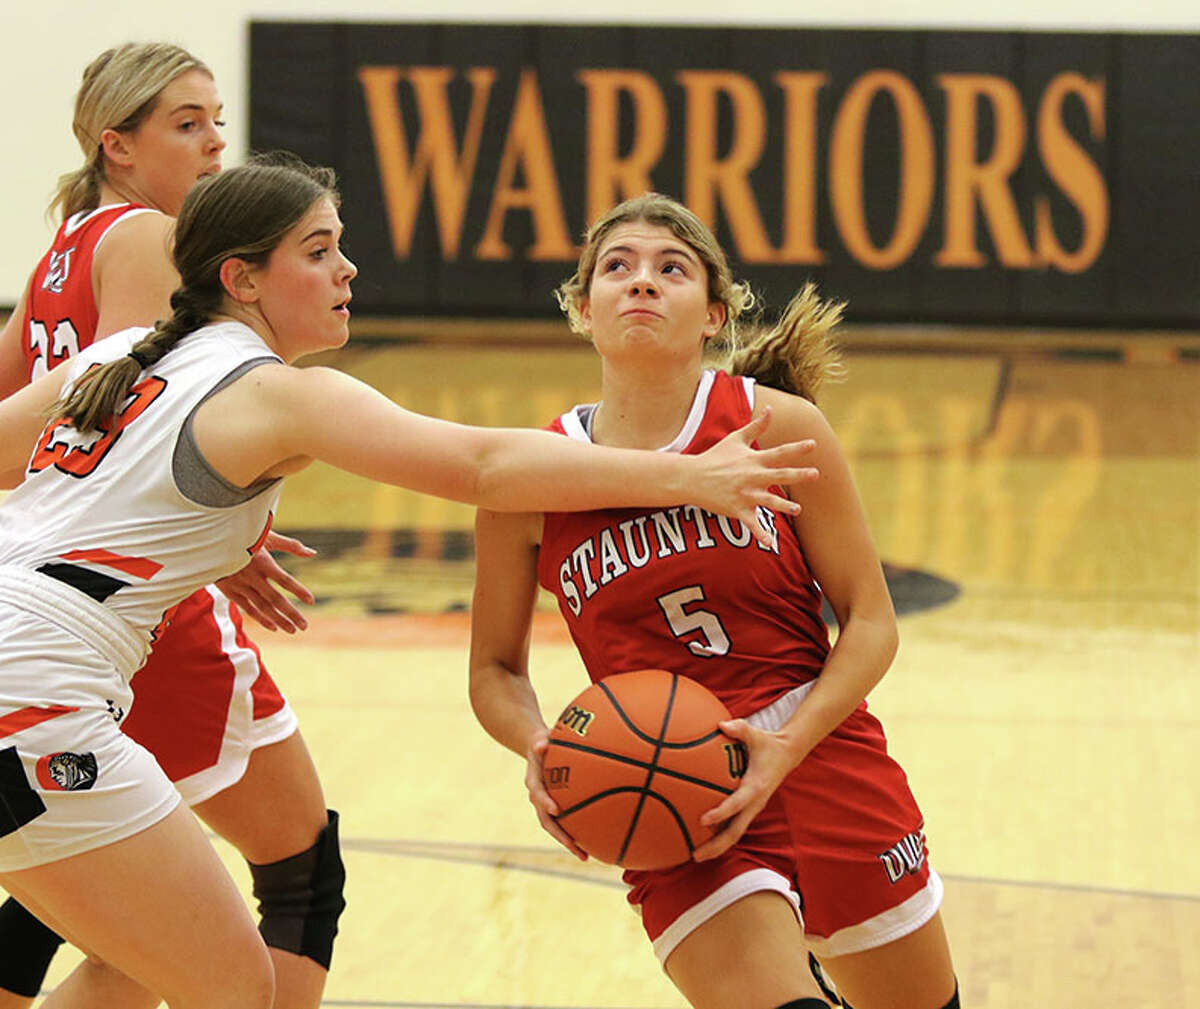 Staunton's Lilly Bandy (right) goes to the basket in a November game against Wesclin at Trenton. On Monday, Bandy scored 20 points in the Bulldogs' SCC win over Vandalia.